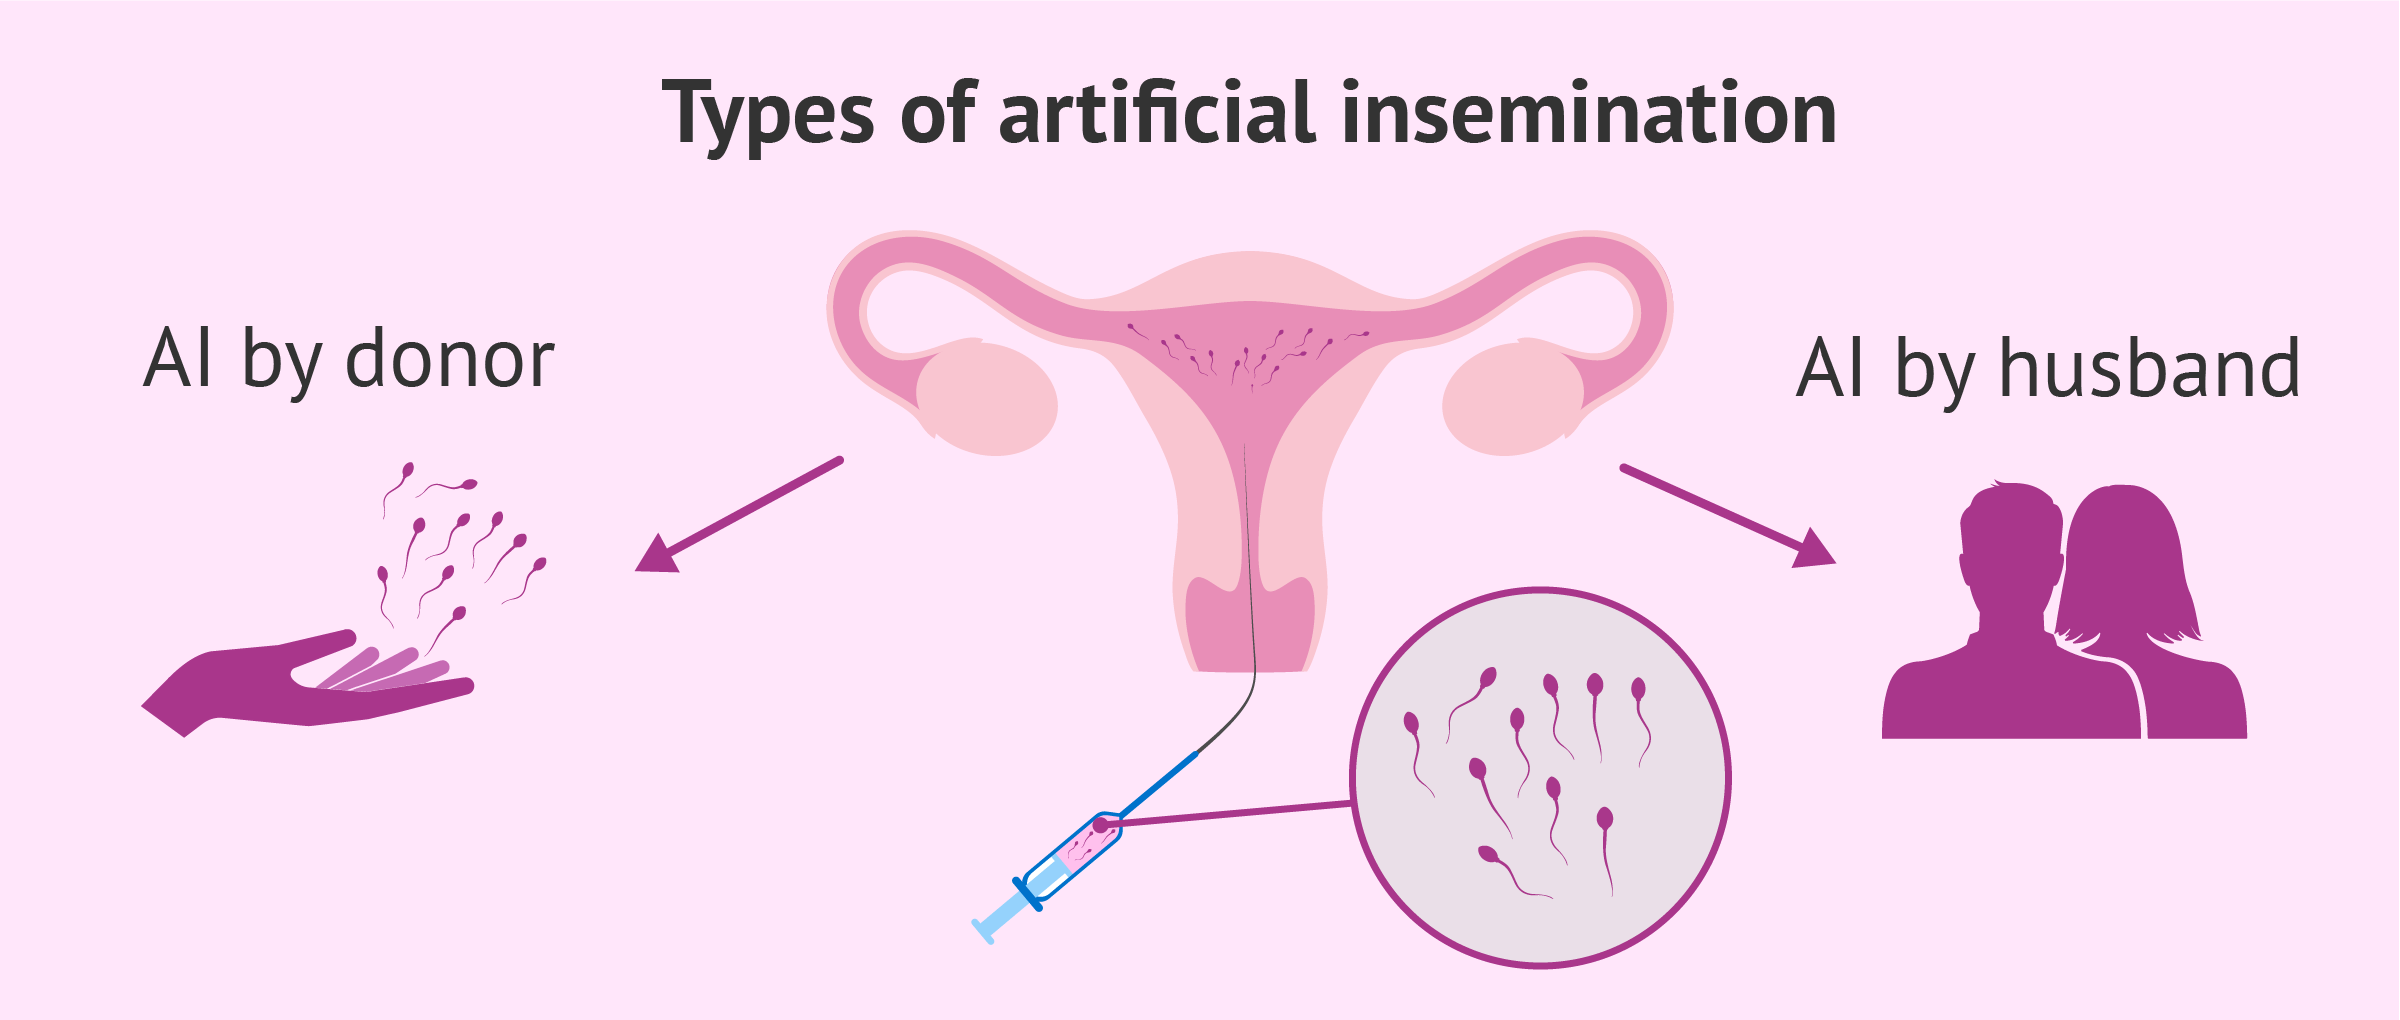 Types of artificial insemination AIH or AID